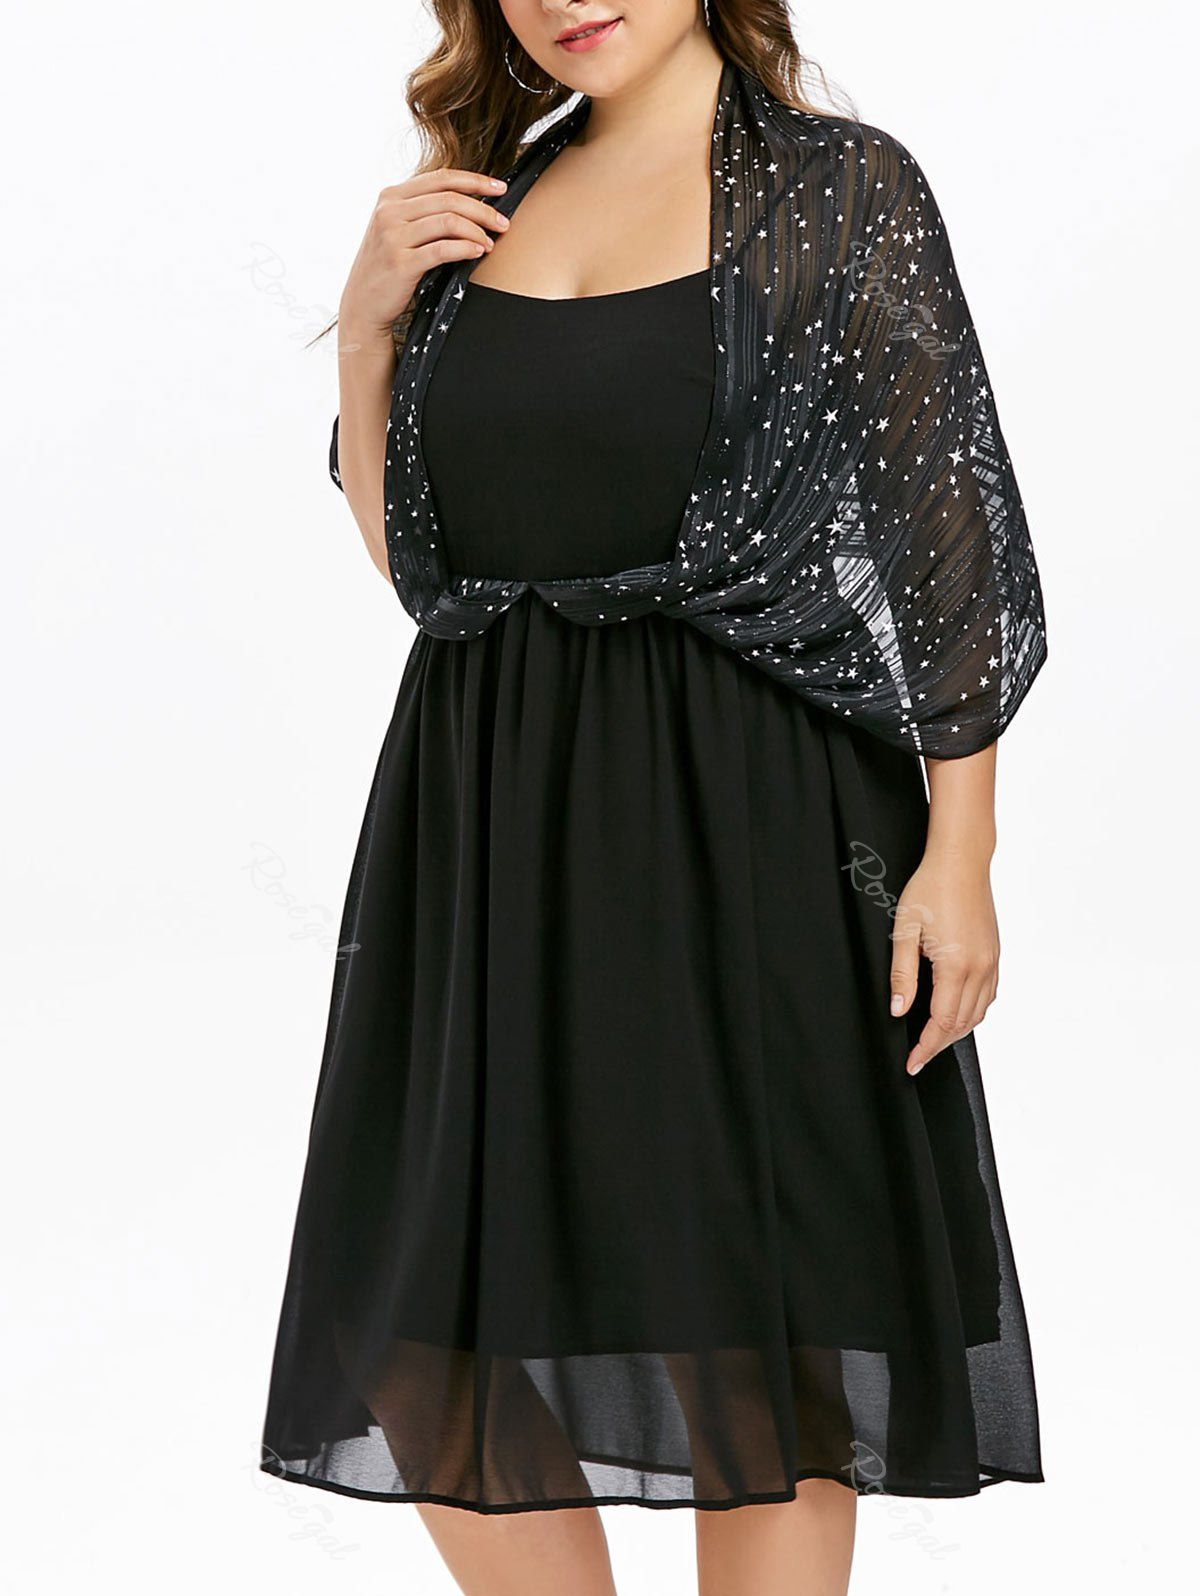 ROSEGAL DRESSES FOR EVERY WOMAN dresses for plus size people